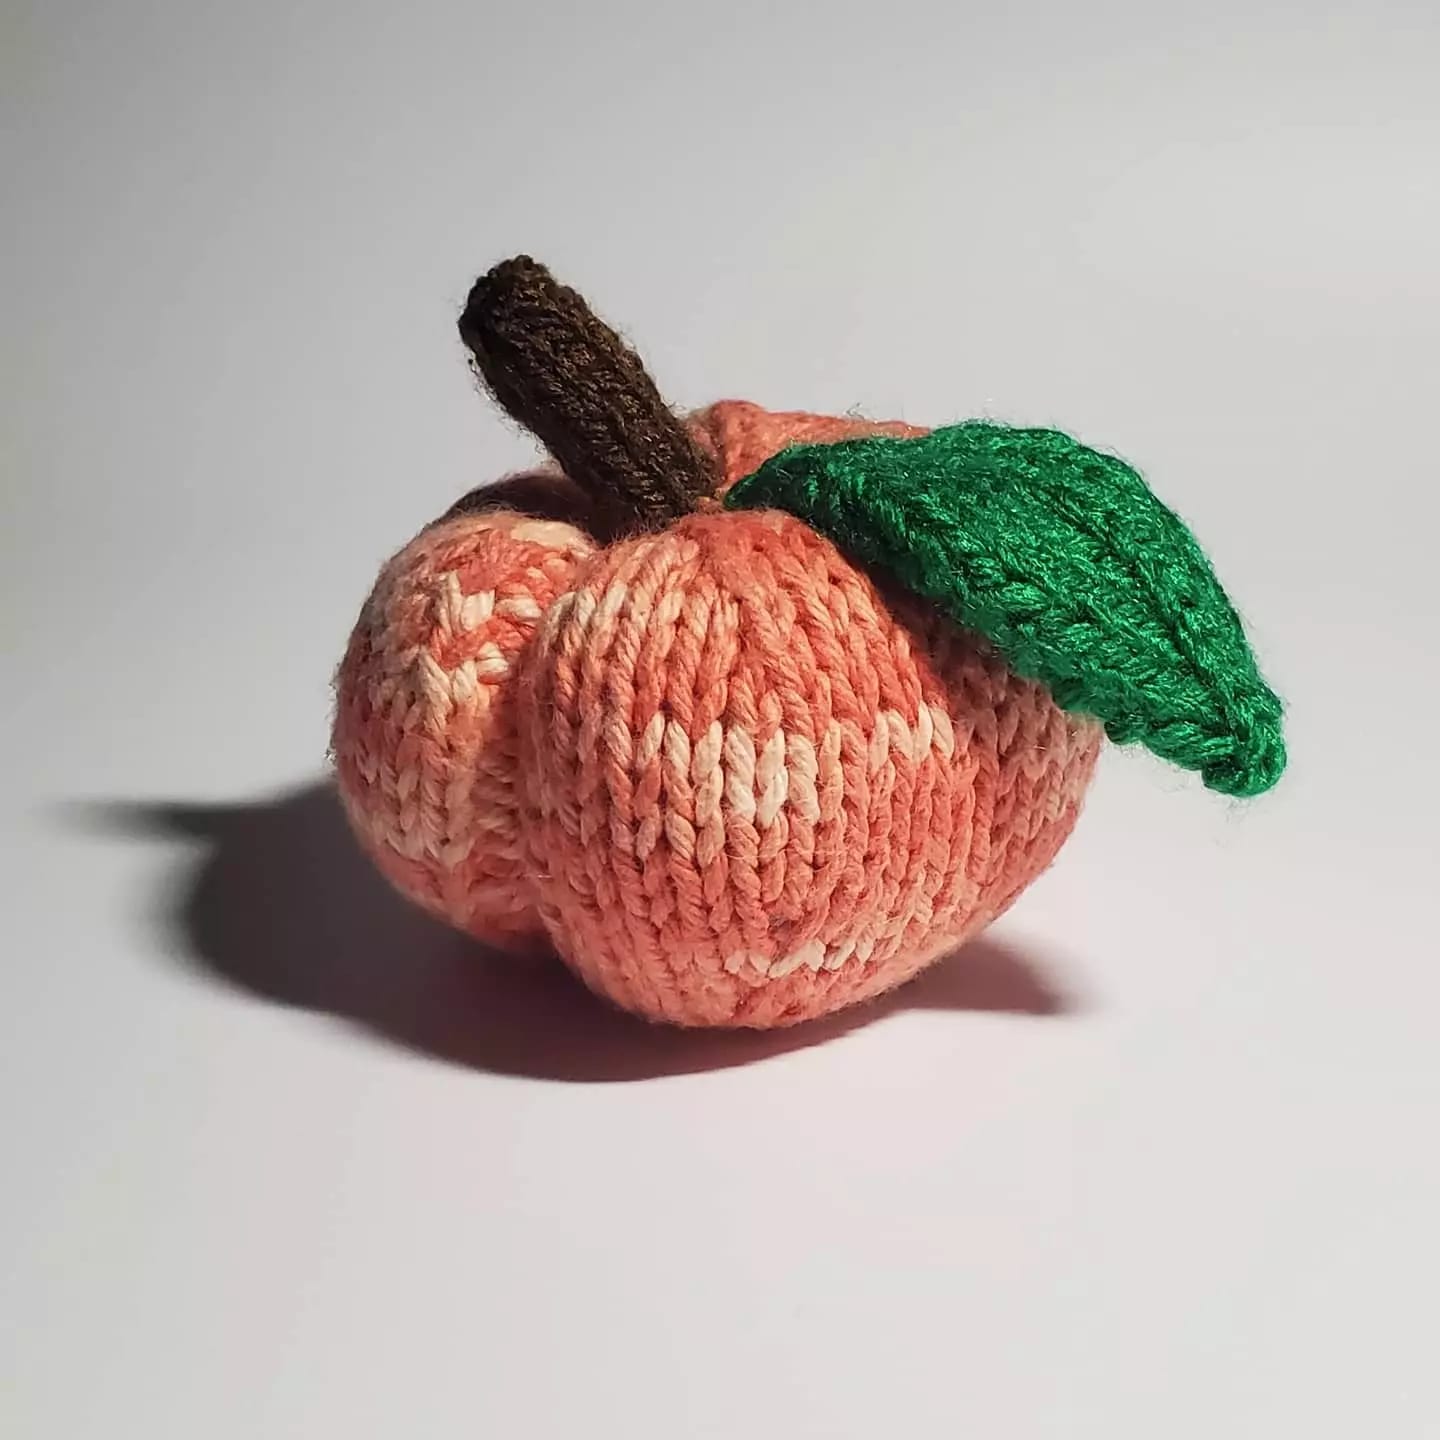 I made a Peach in honor of the 'peachment.